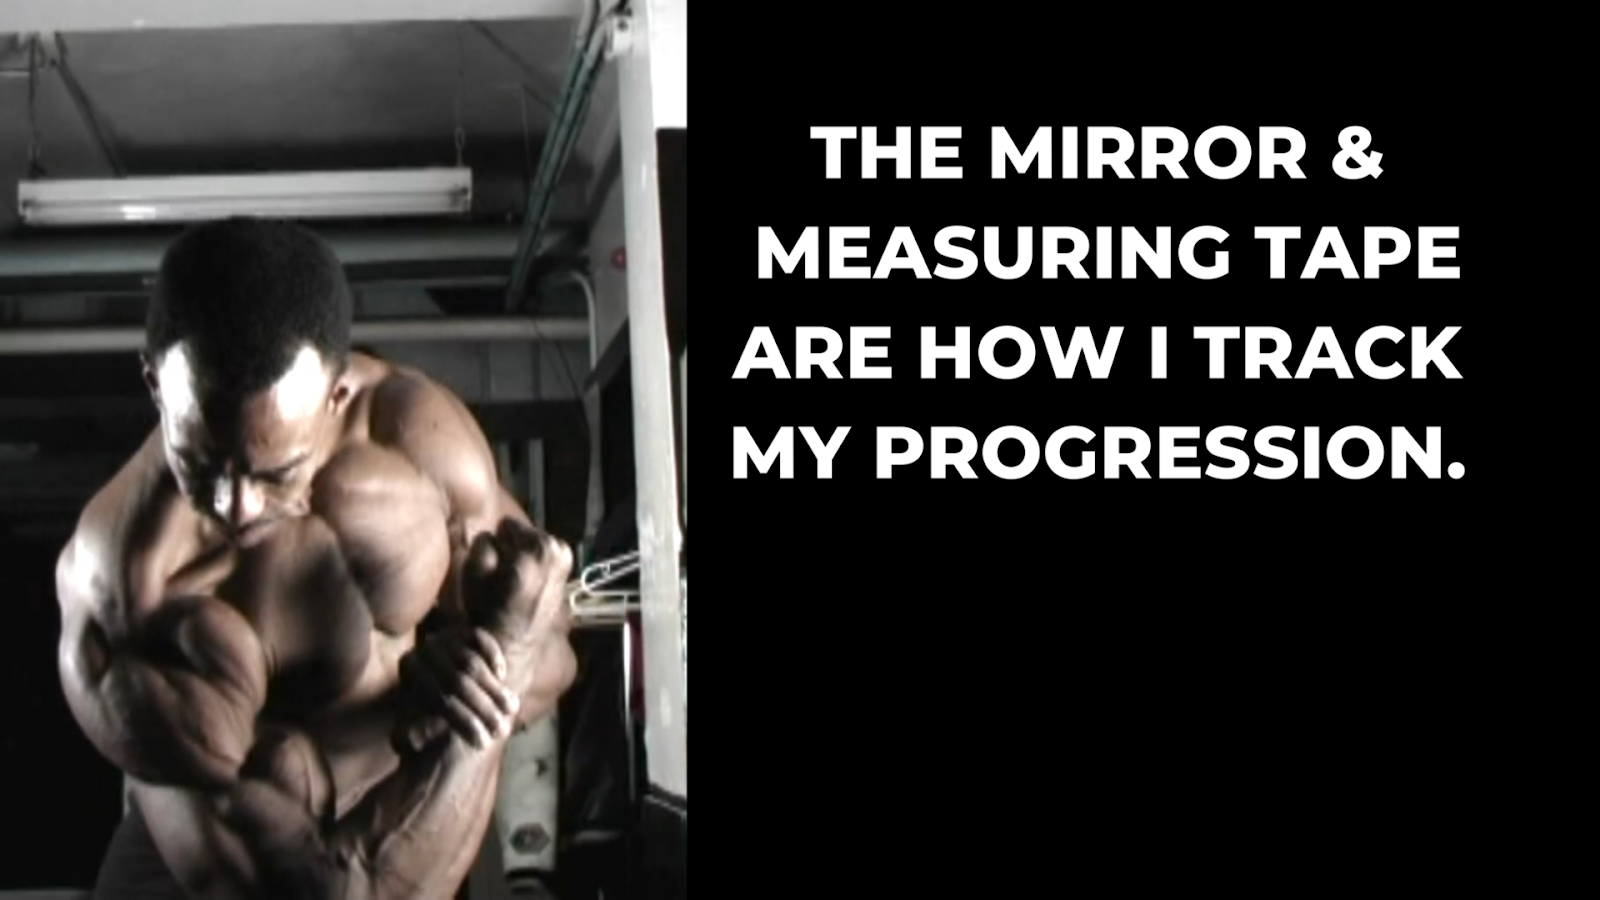 Bodybuilder Kevin Richardson focuses on how he looks and feels to track progression